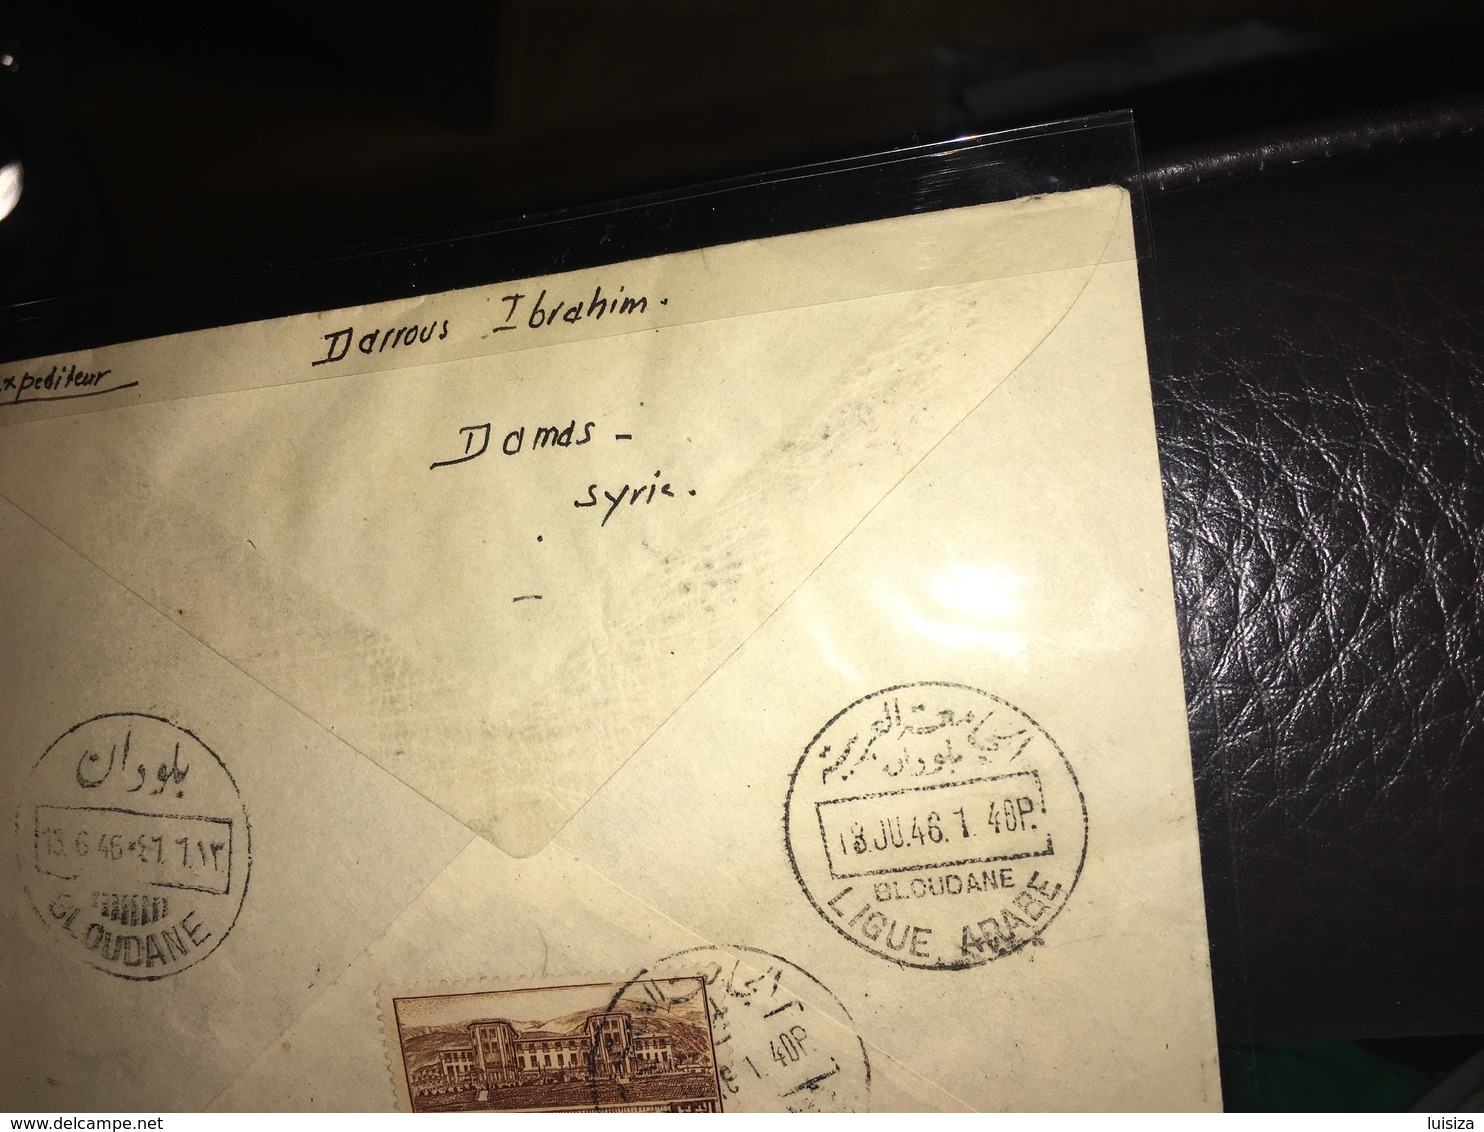 See photos. Syria 1946 cover